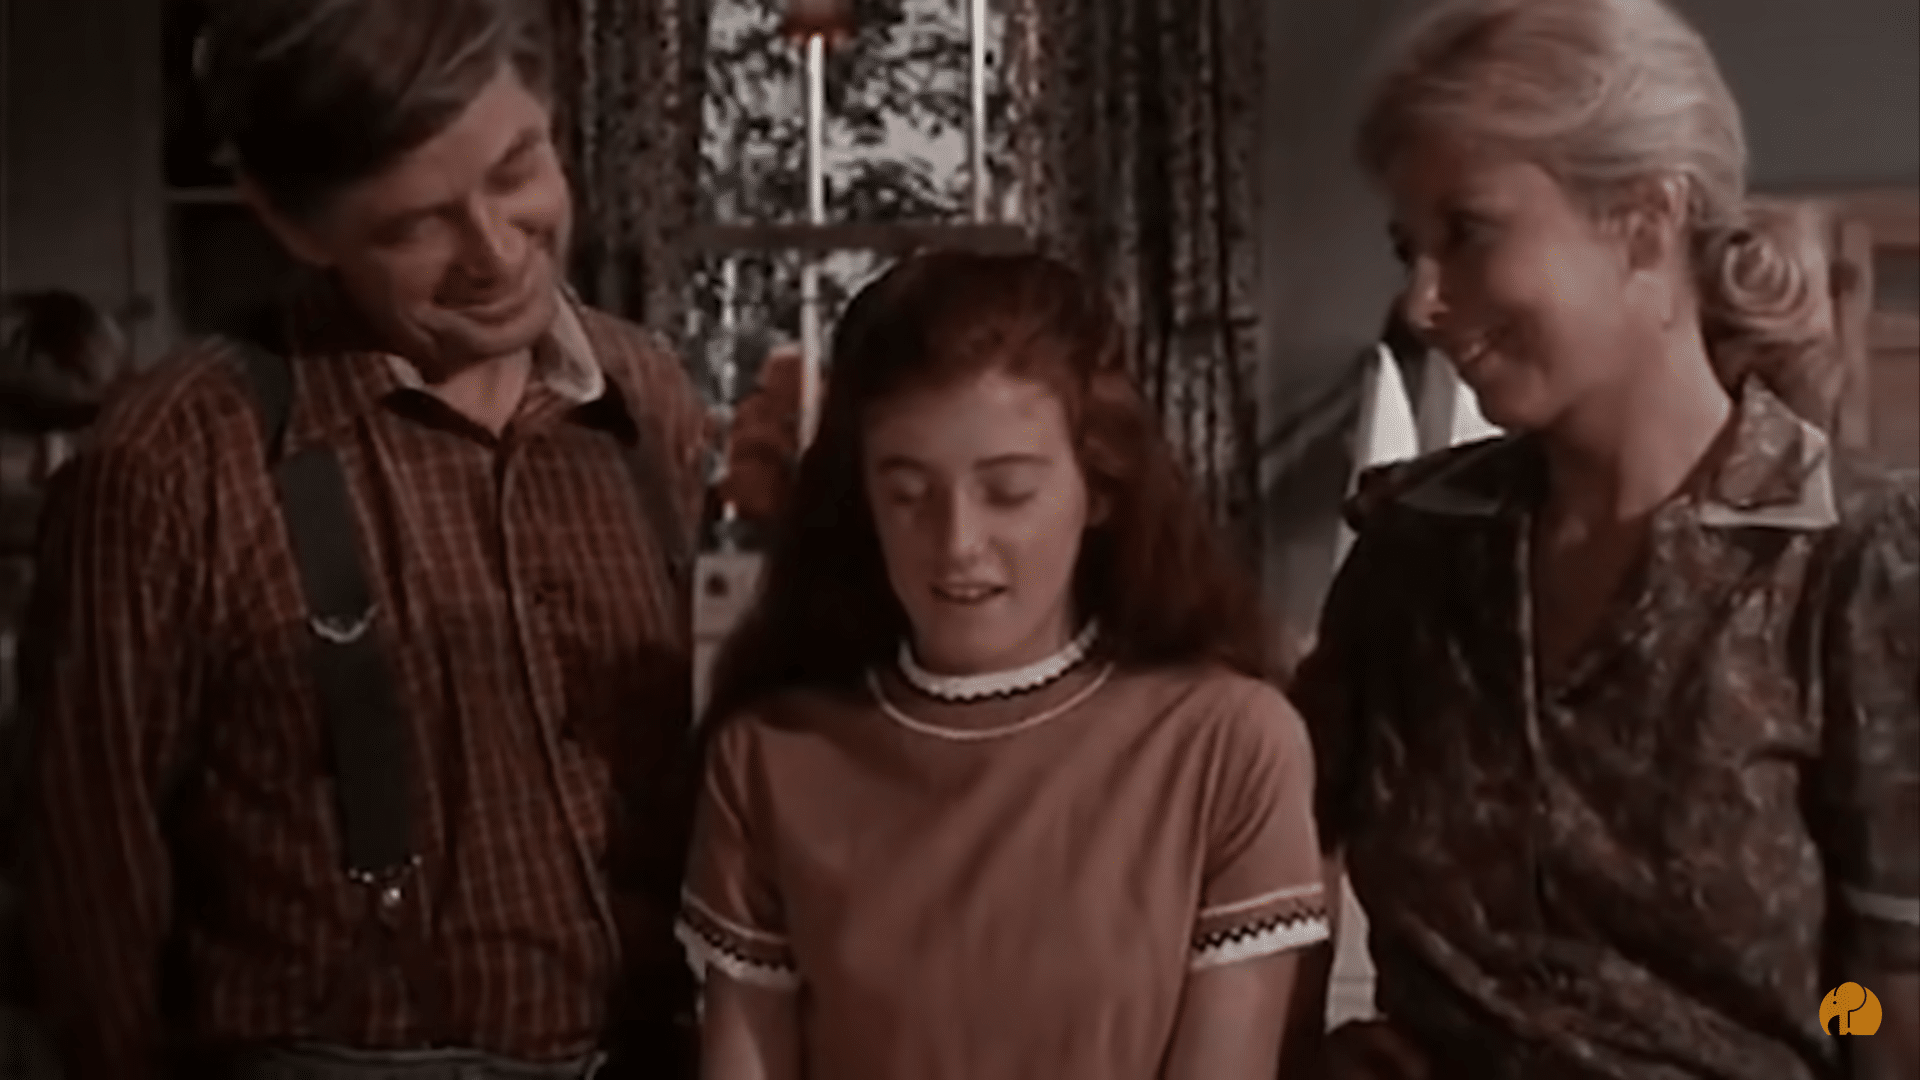 Whatever Happened To Kami Cotler Elizabeth Walton From The Waltons